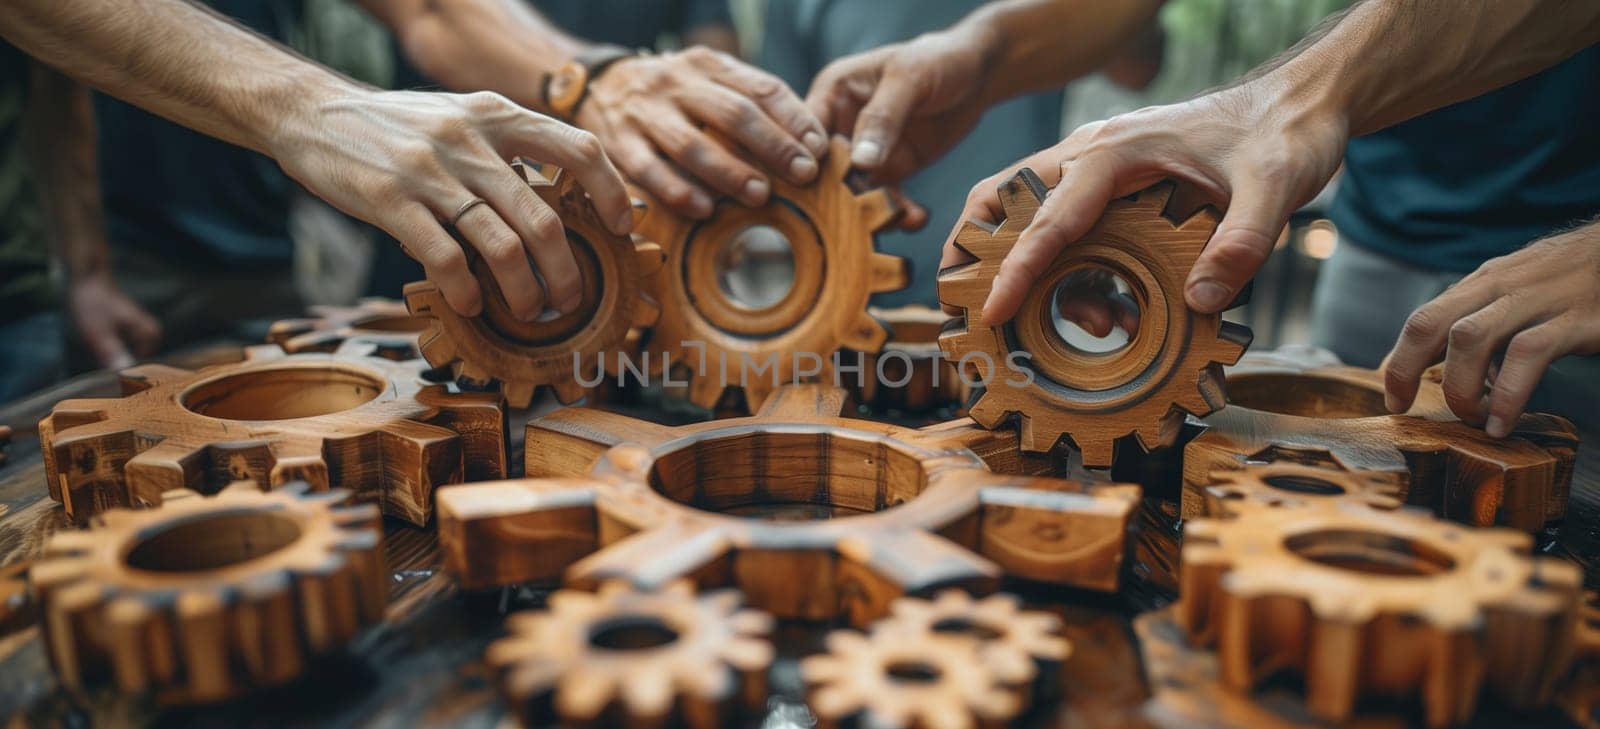 A group of individuals collaboratively assembling wooden gears on a table, showcasing intricate patterns and symmetrical designs, resembling a work of art